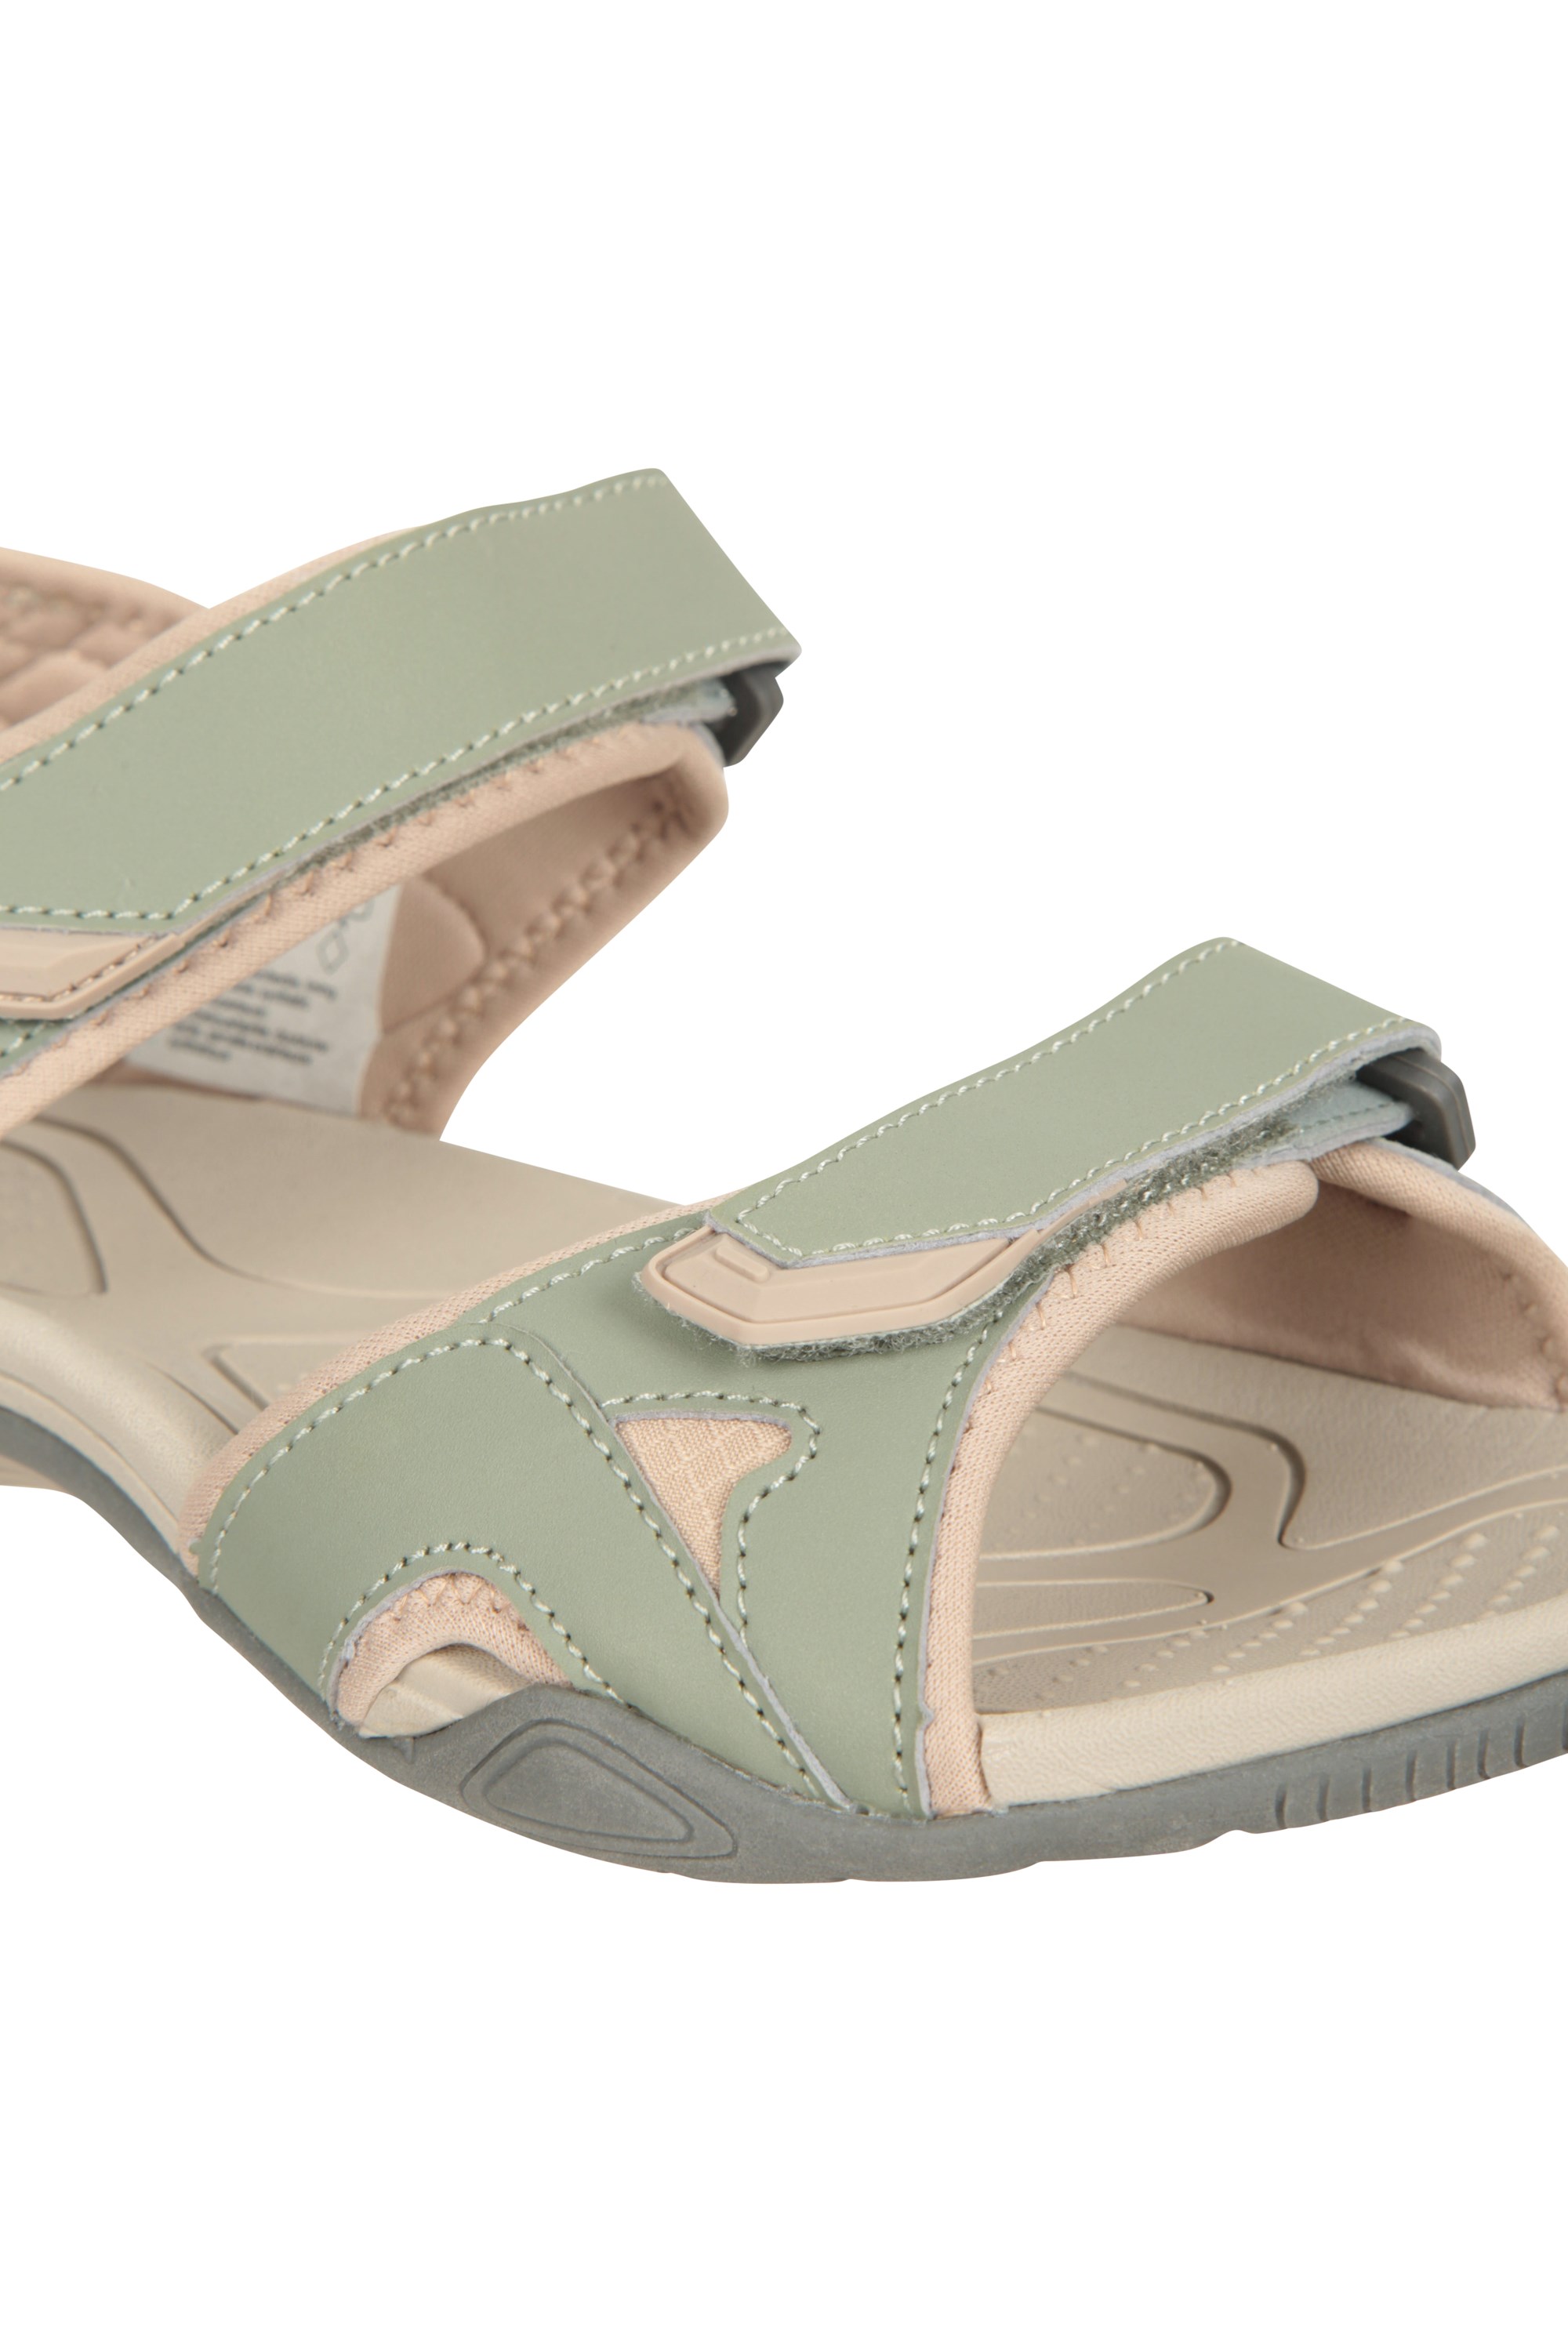 Andros Womens Sandals